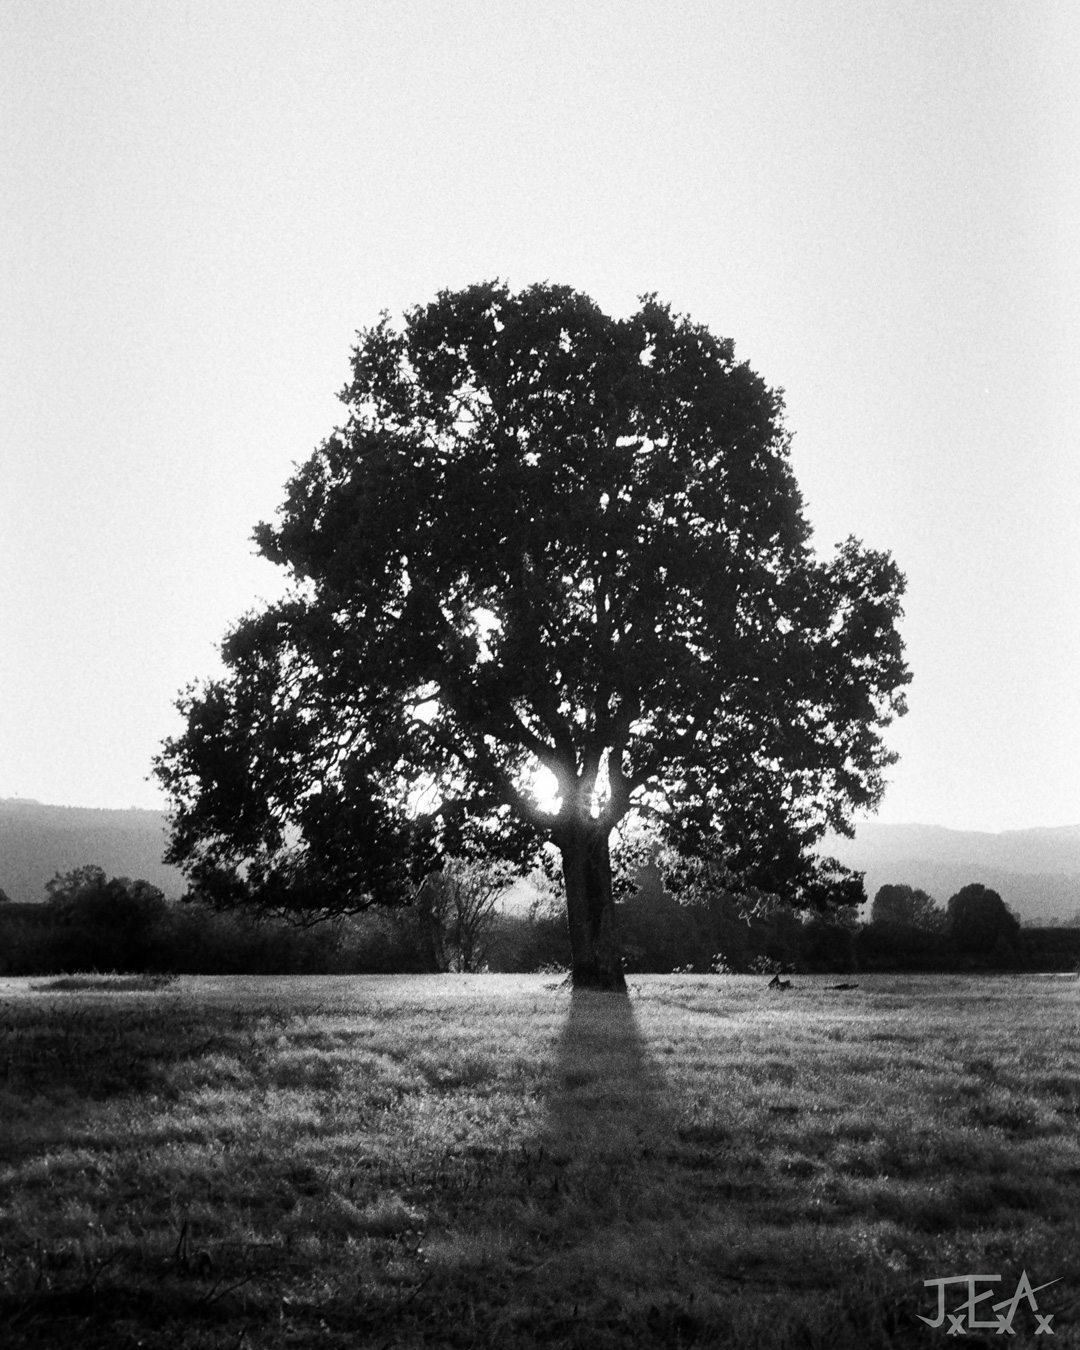 A black and white image of the sun shining through a lone oak tree in a grassy field.